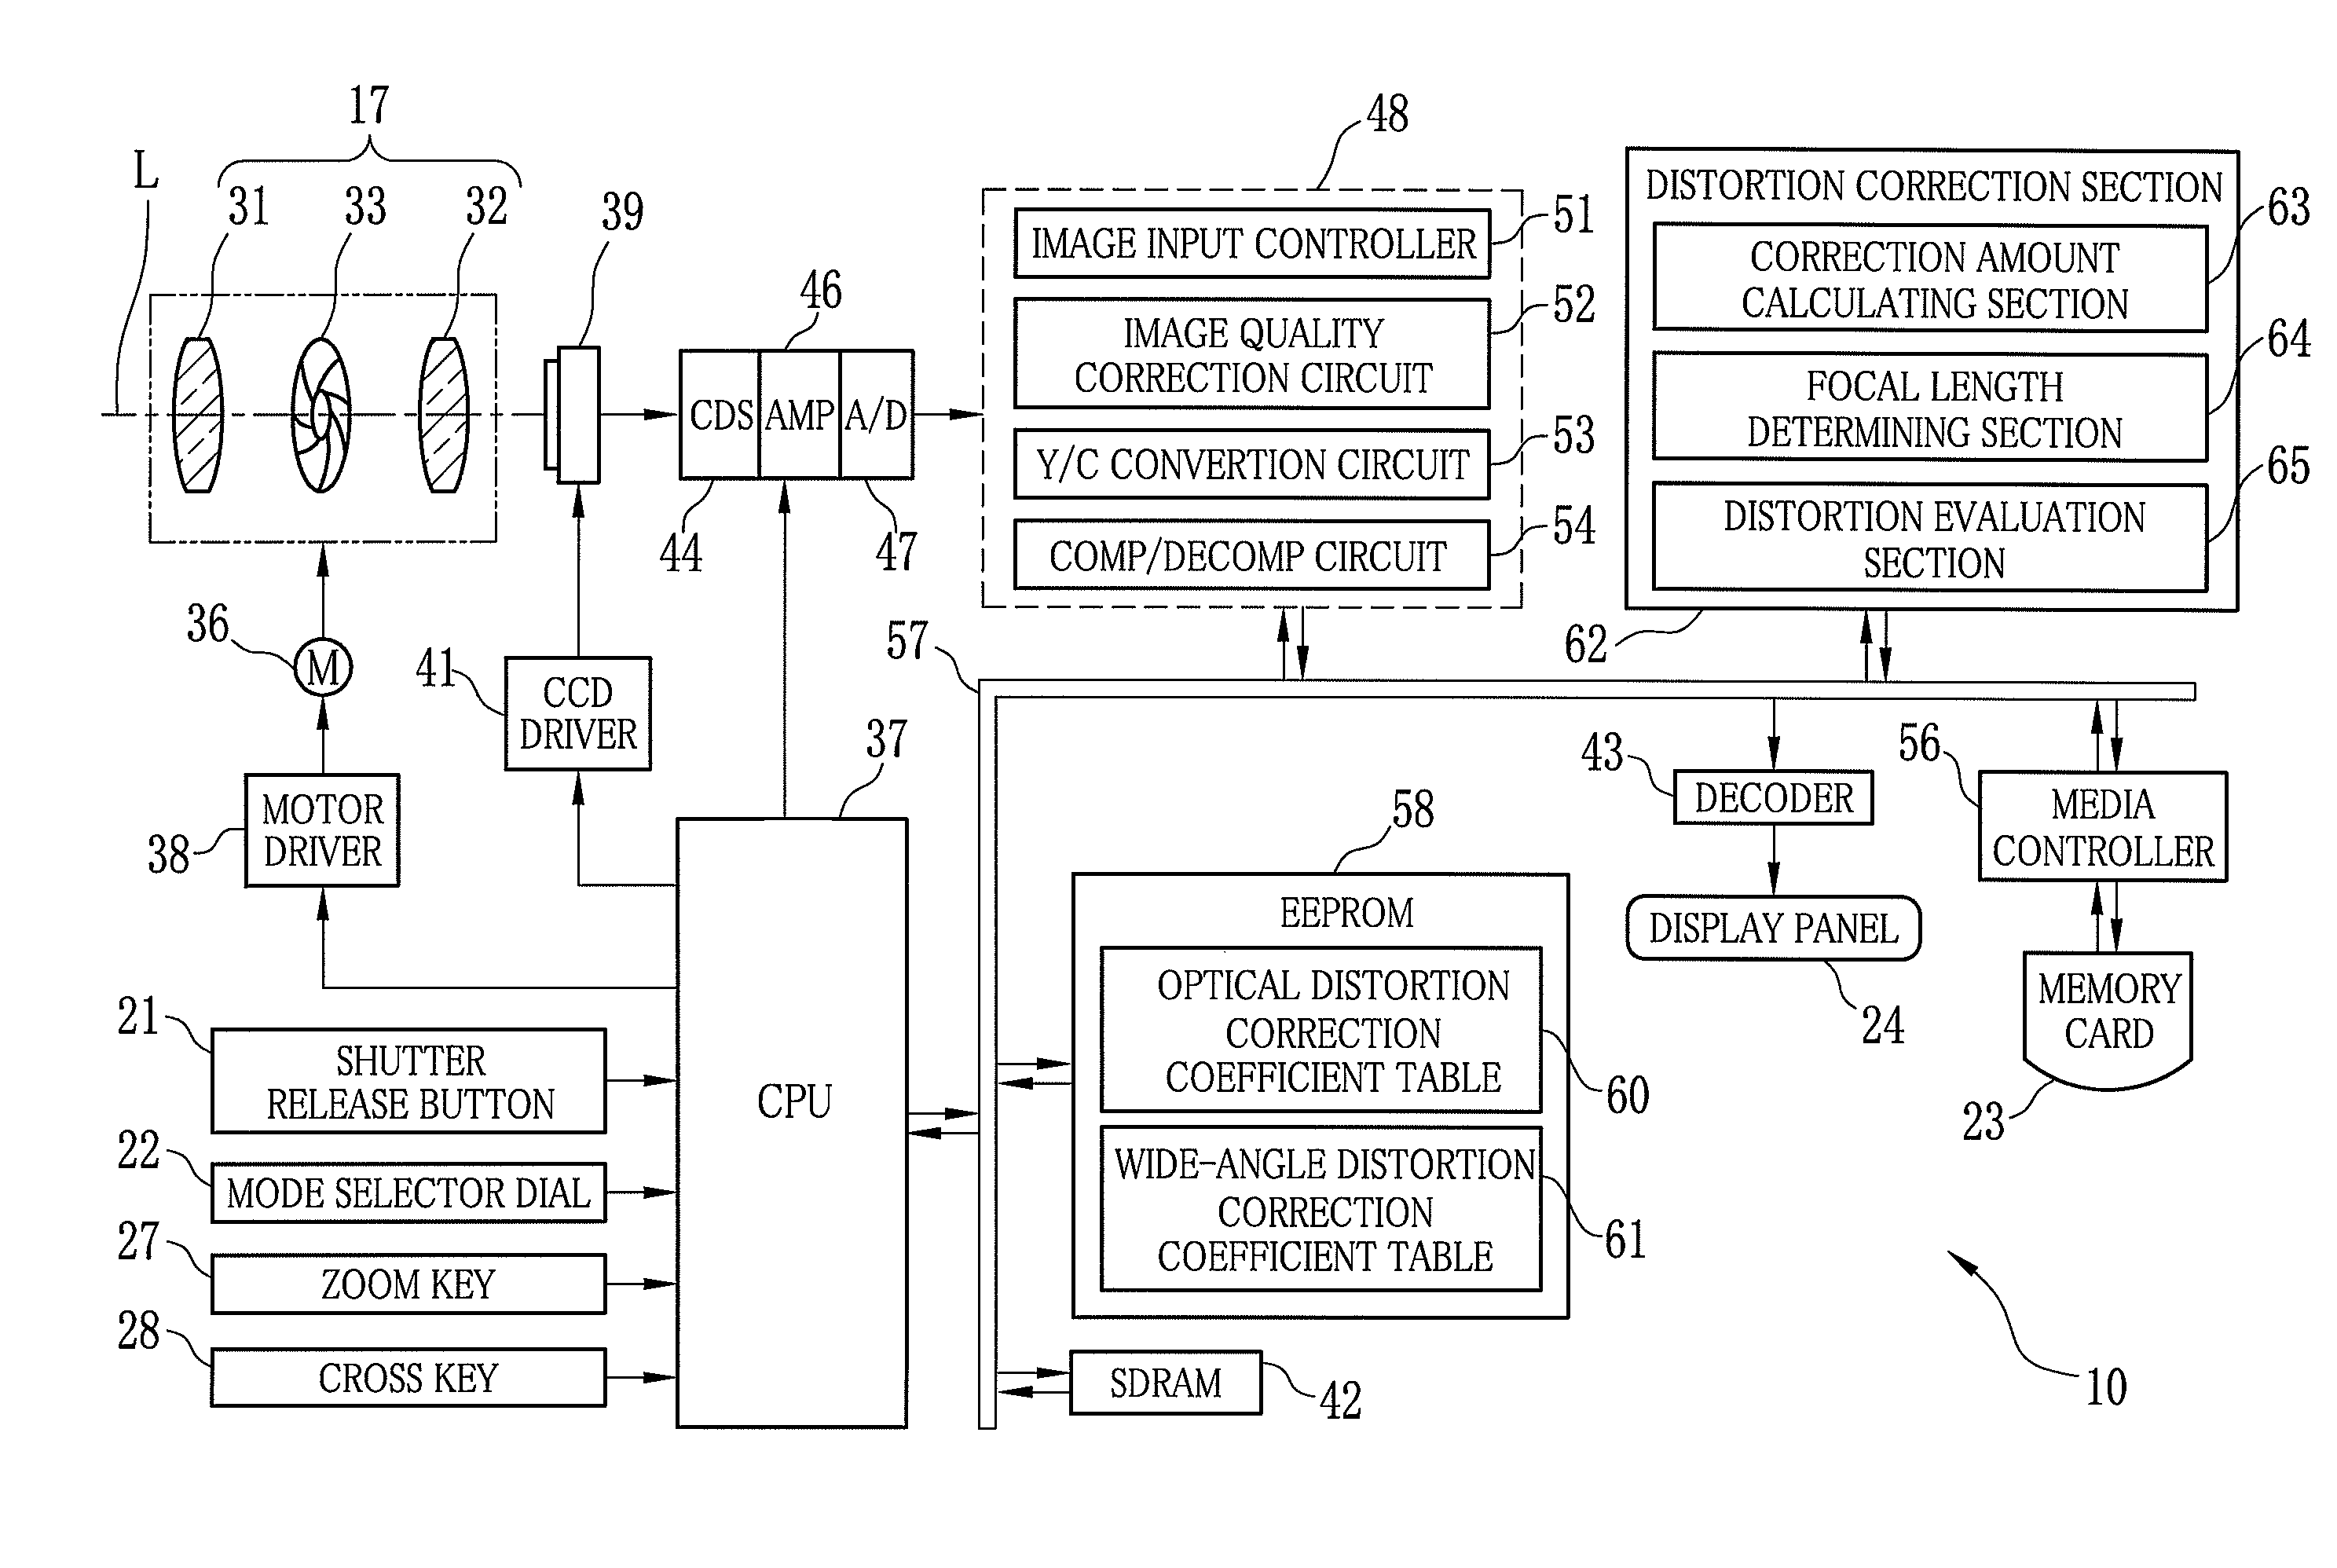 Imaging apparatus for correcting optical distortion and wide-angle distortion